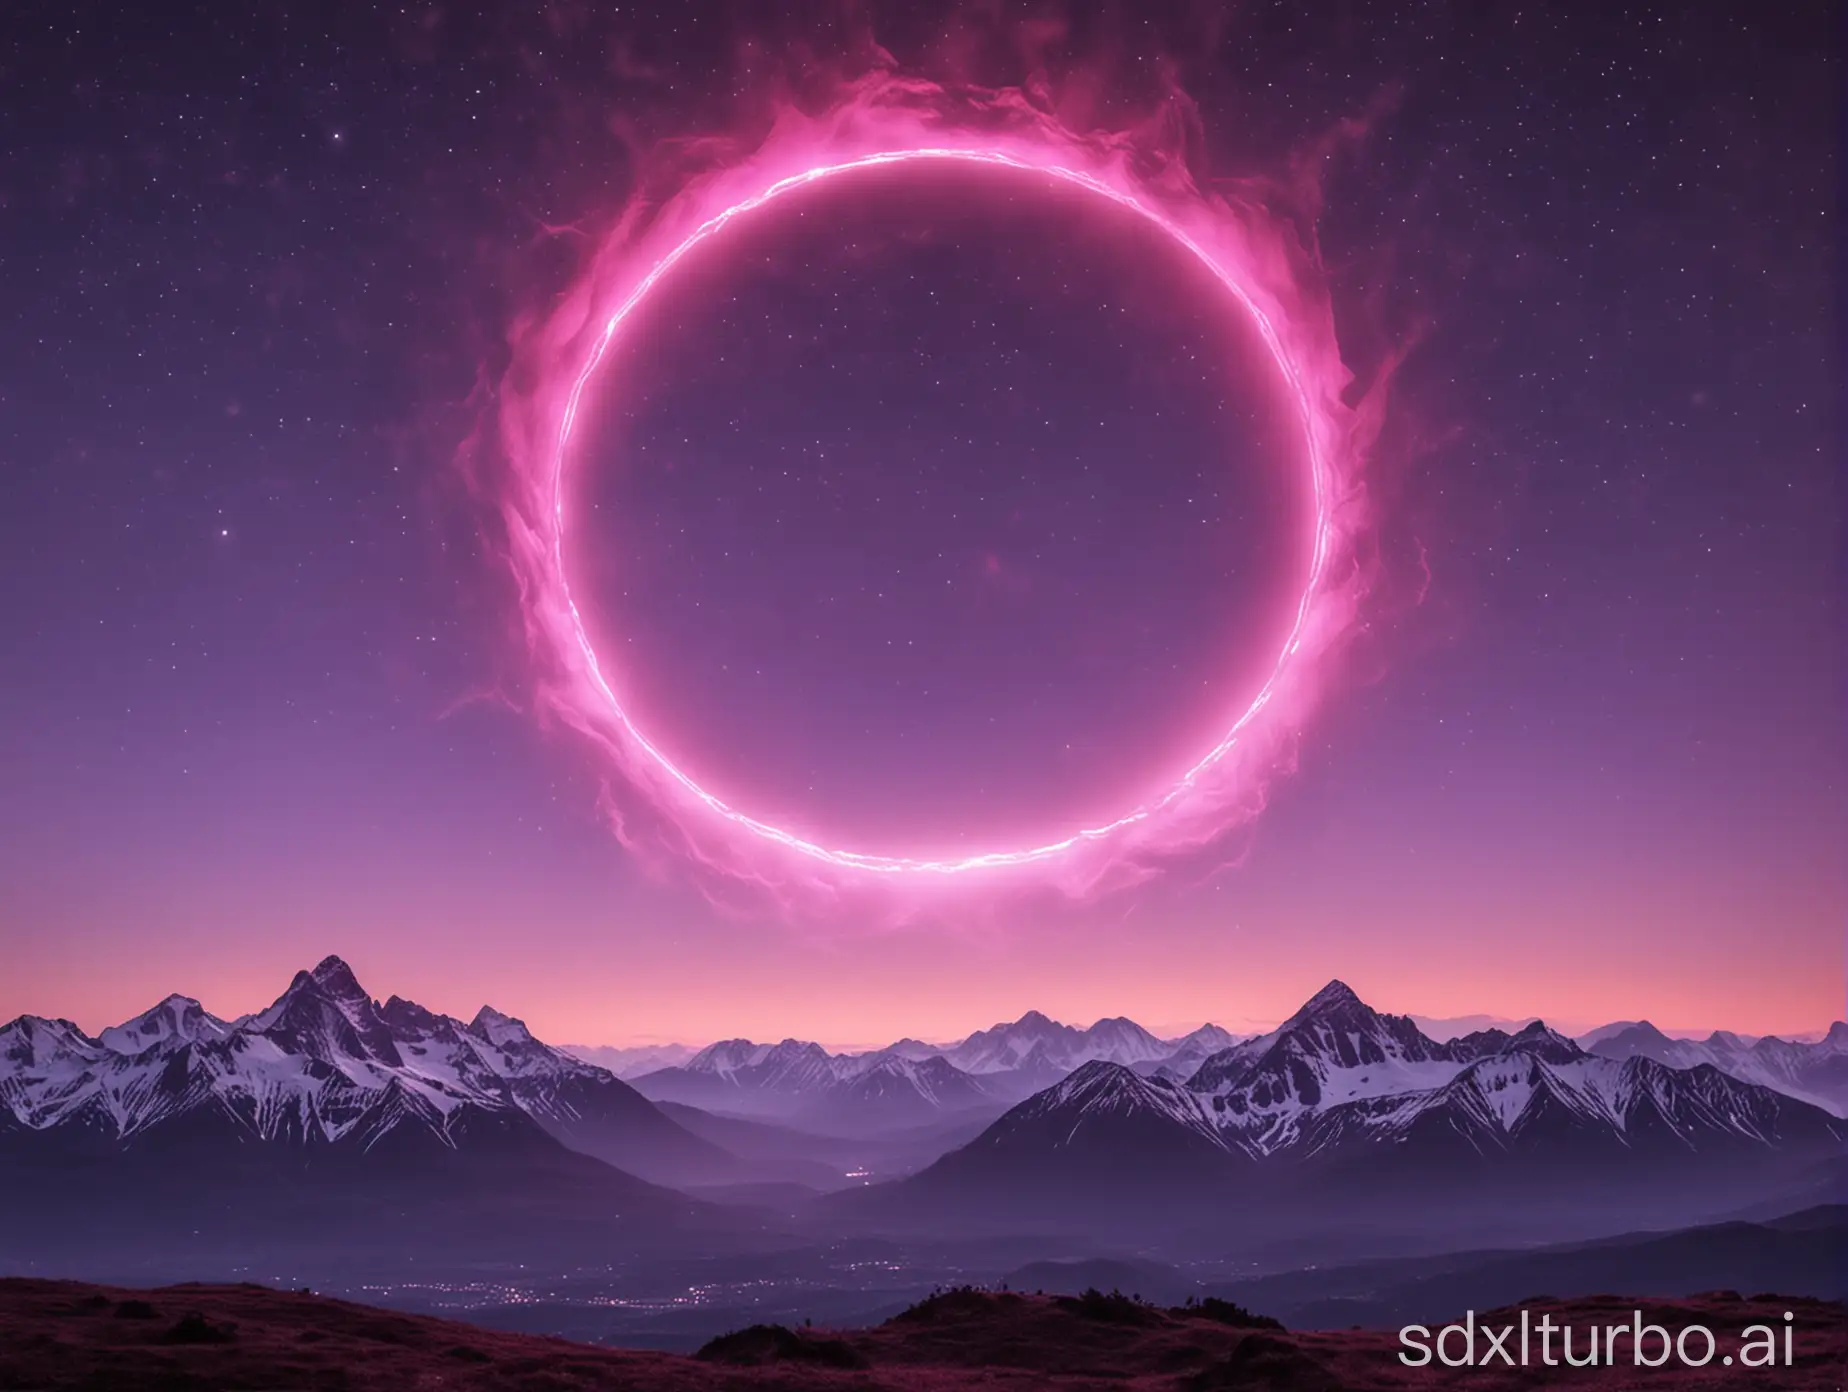 purple sky with a glowing pink ring around a central point. The ring is made up of a bright inner circle and a fainter outer circle. The sky is darkest at the top and fades to a lighter purple at the bottom. There is a mountain range in the foreground, which is also purple. The mountains are silhouetted against the sky